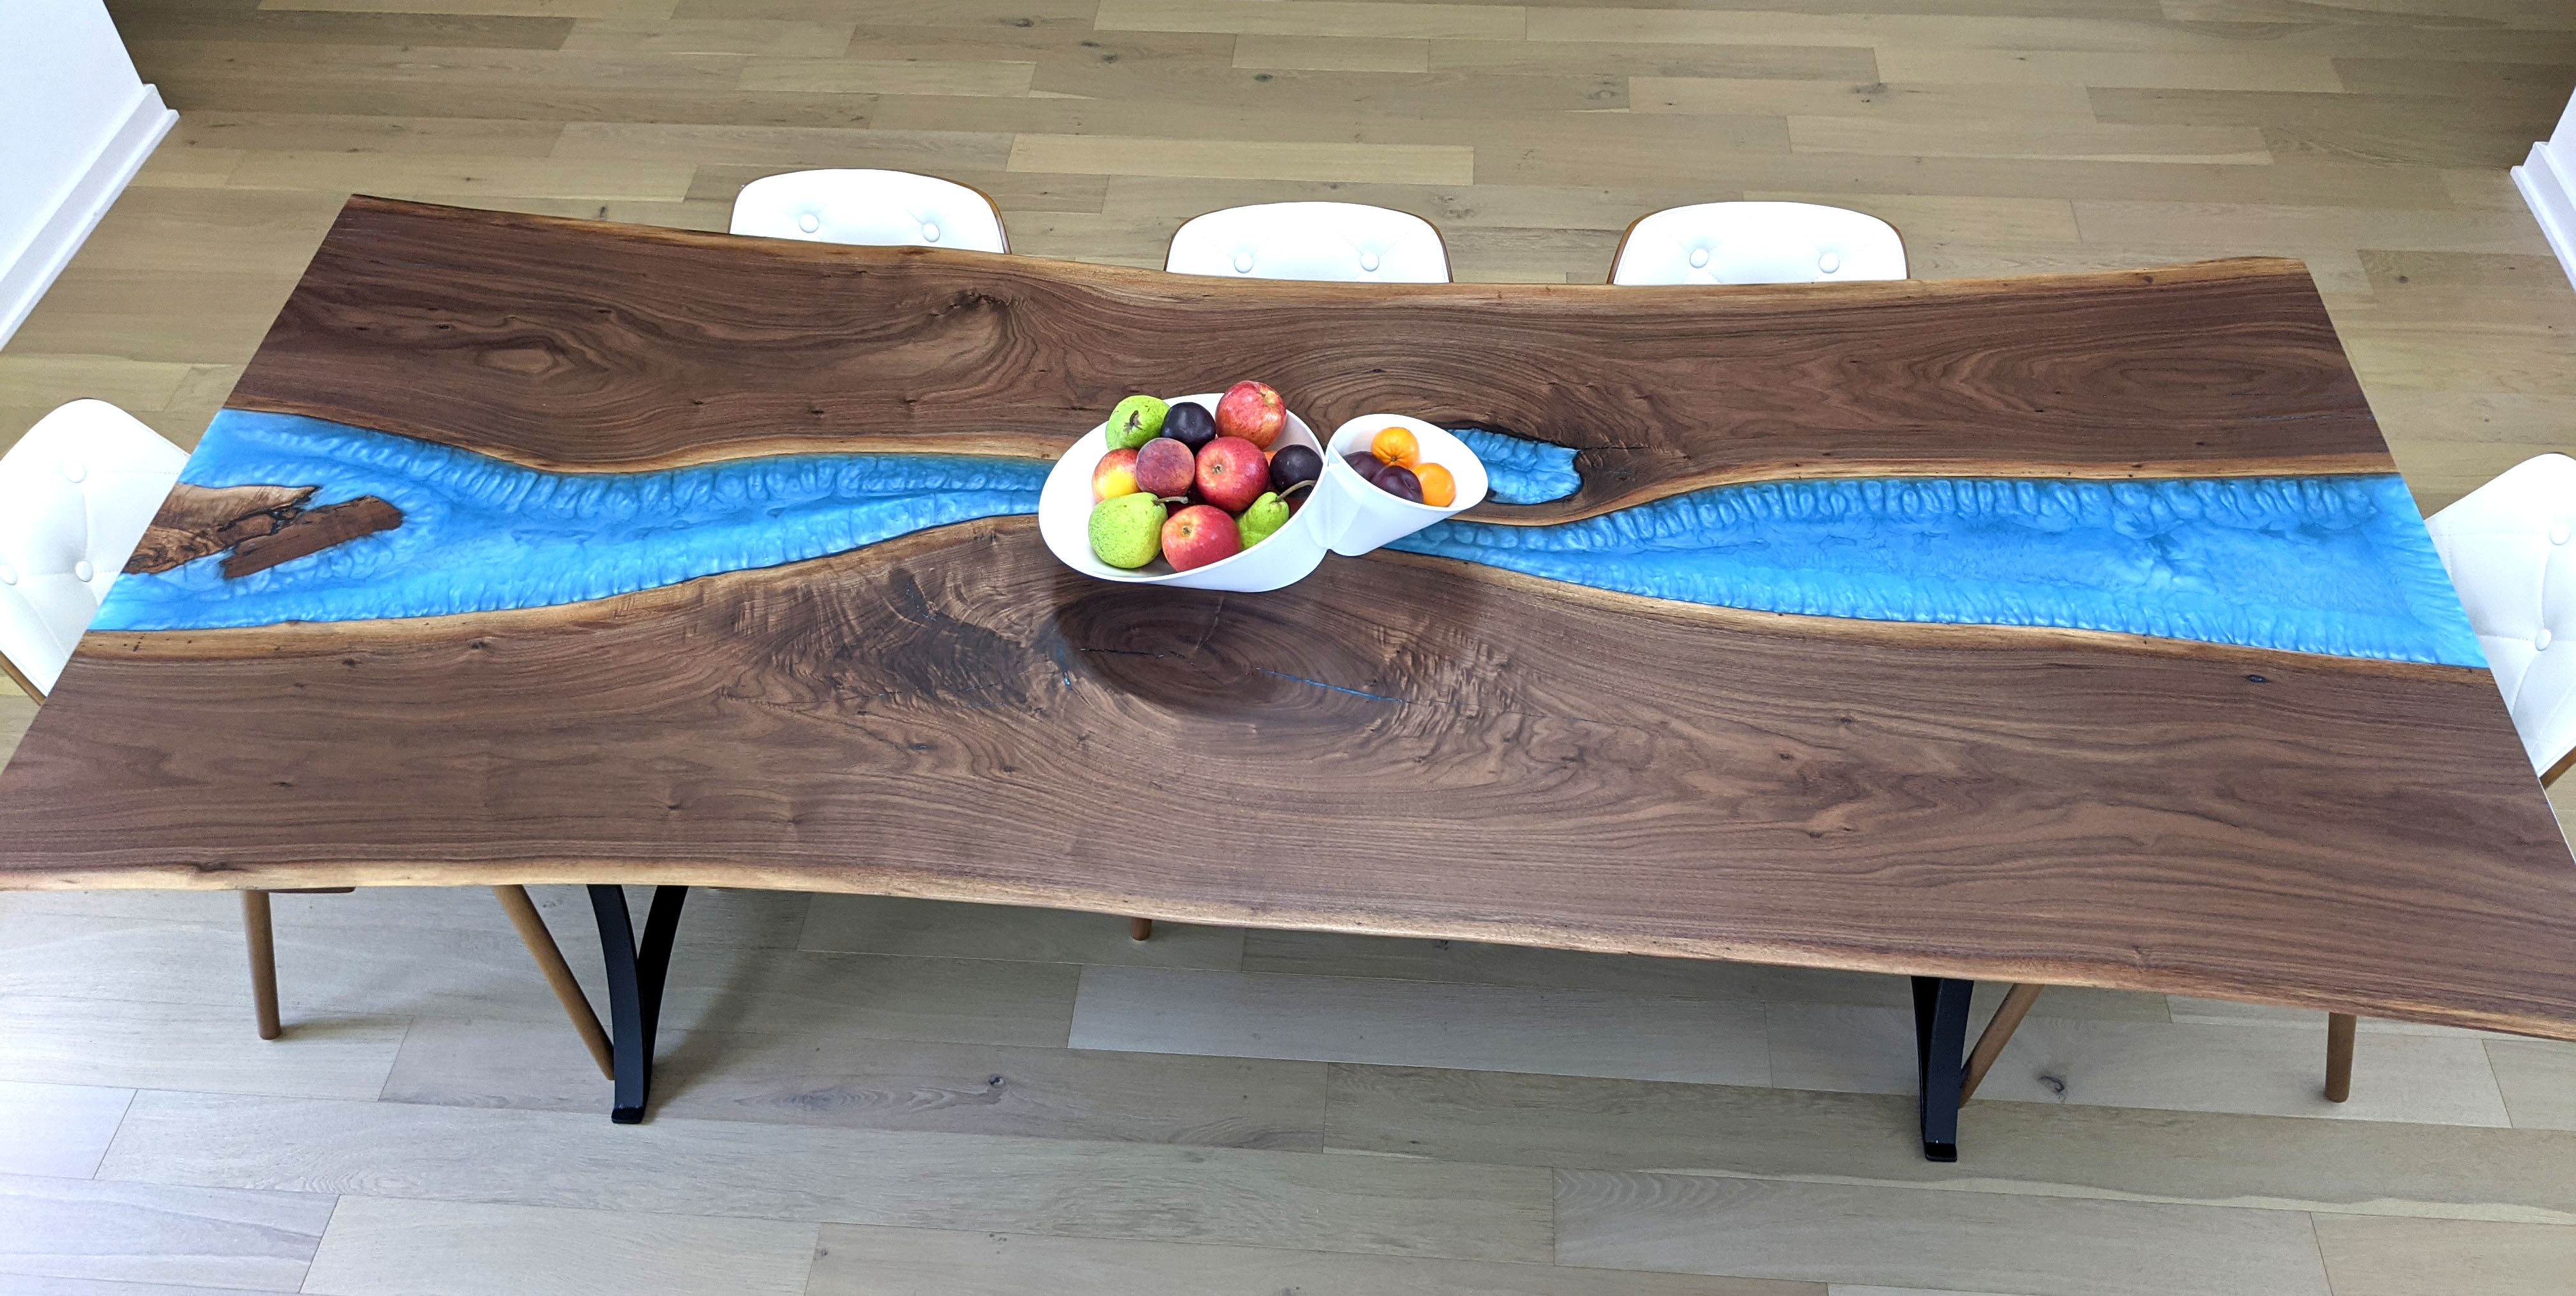 https://www.chagrinvalleycustomfurniture.com/blog/wp-content/uploads/2022/02/Walnut-Live-Edge-Dining-Table-With-Blue-River.jpg